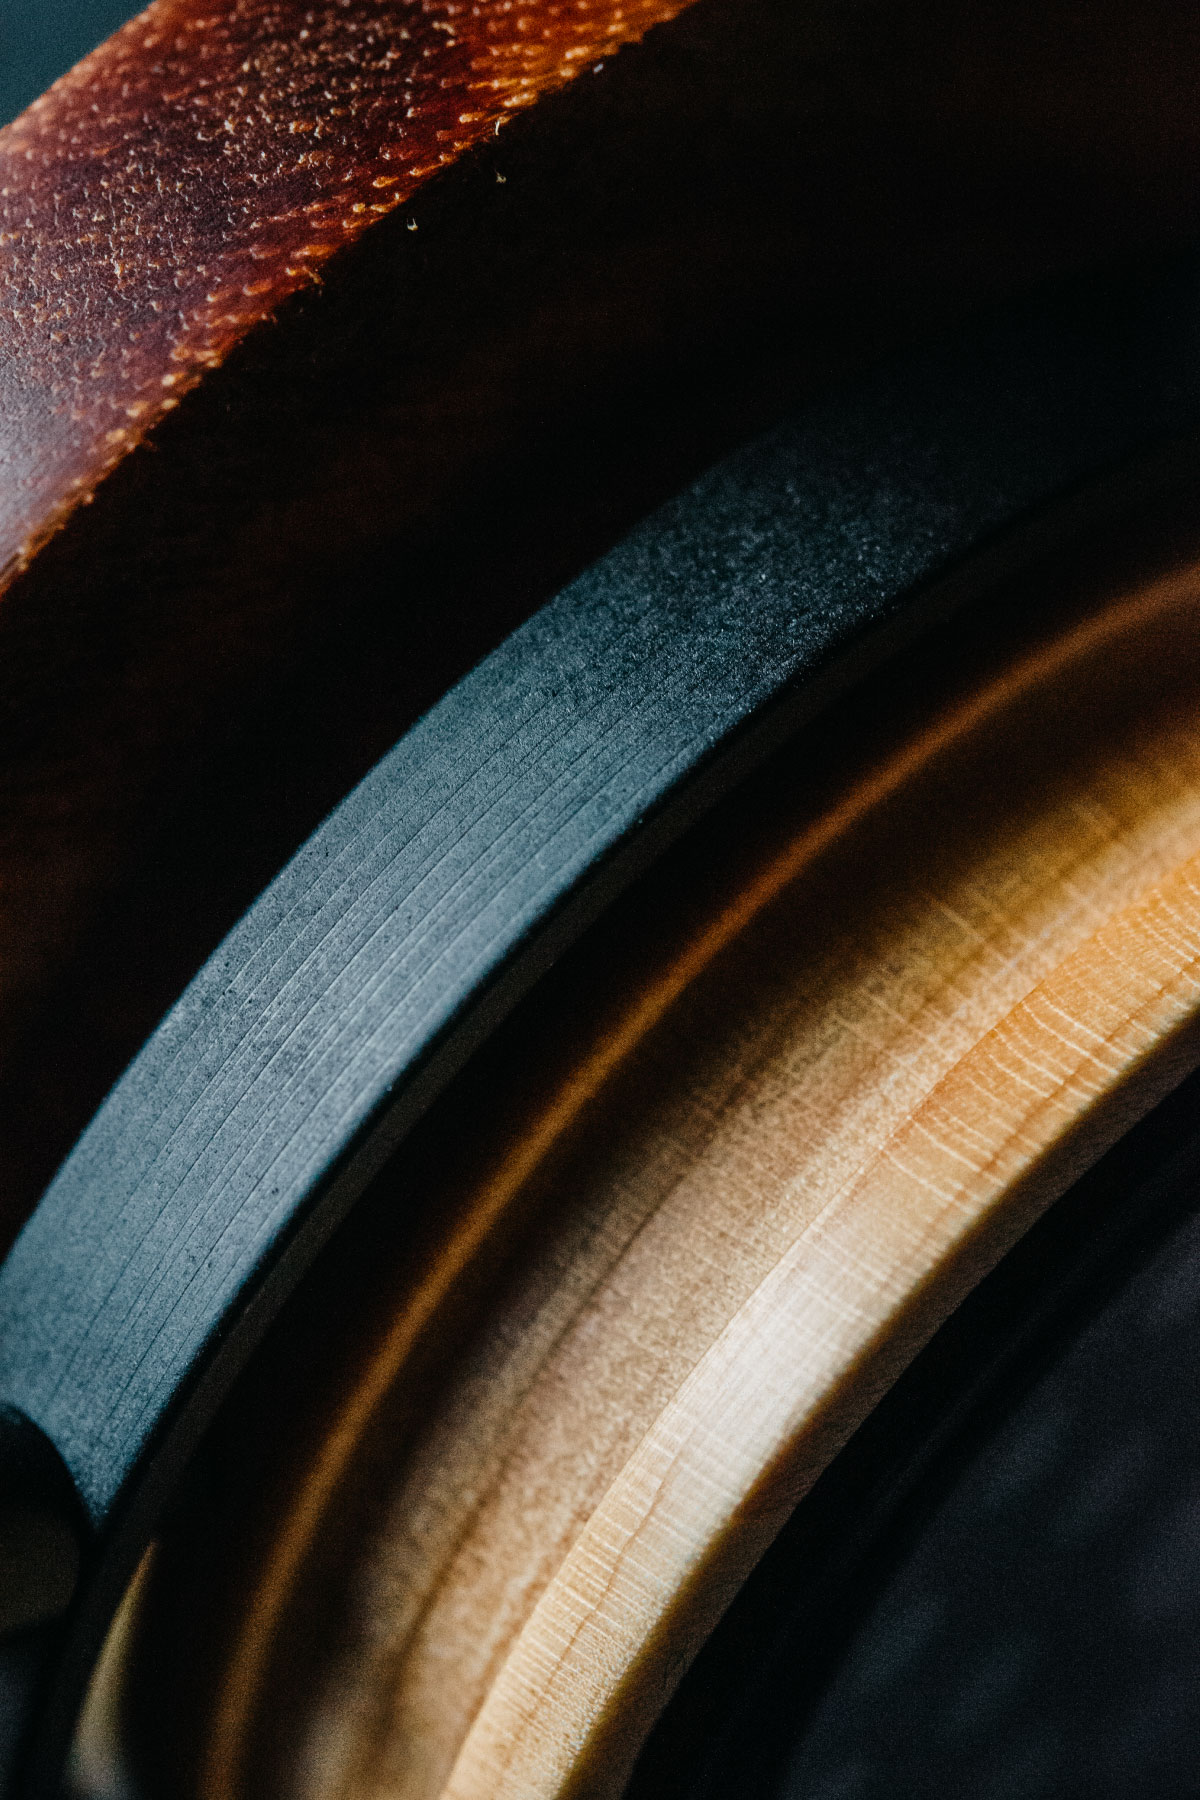 Closeup of gs2000e headphones showing details of wood and leather.